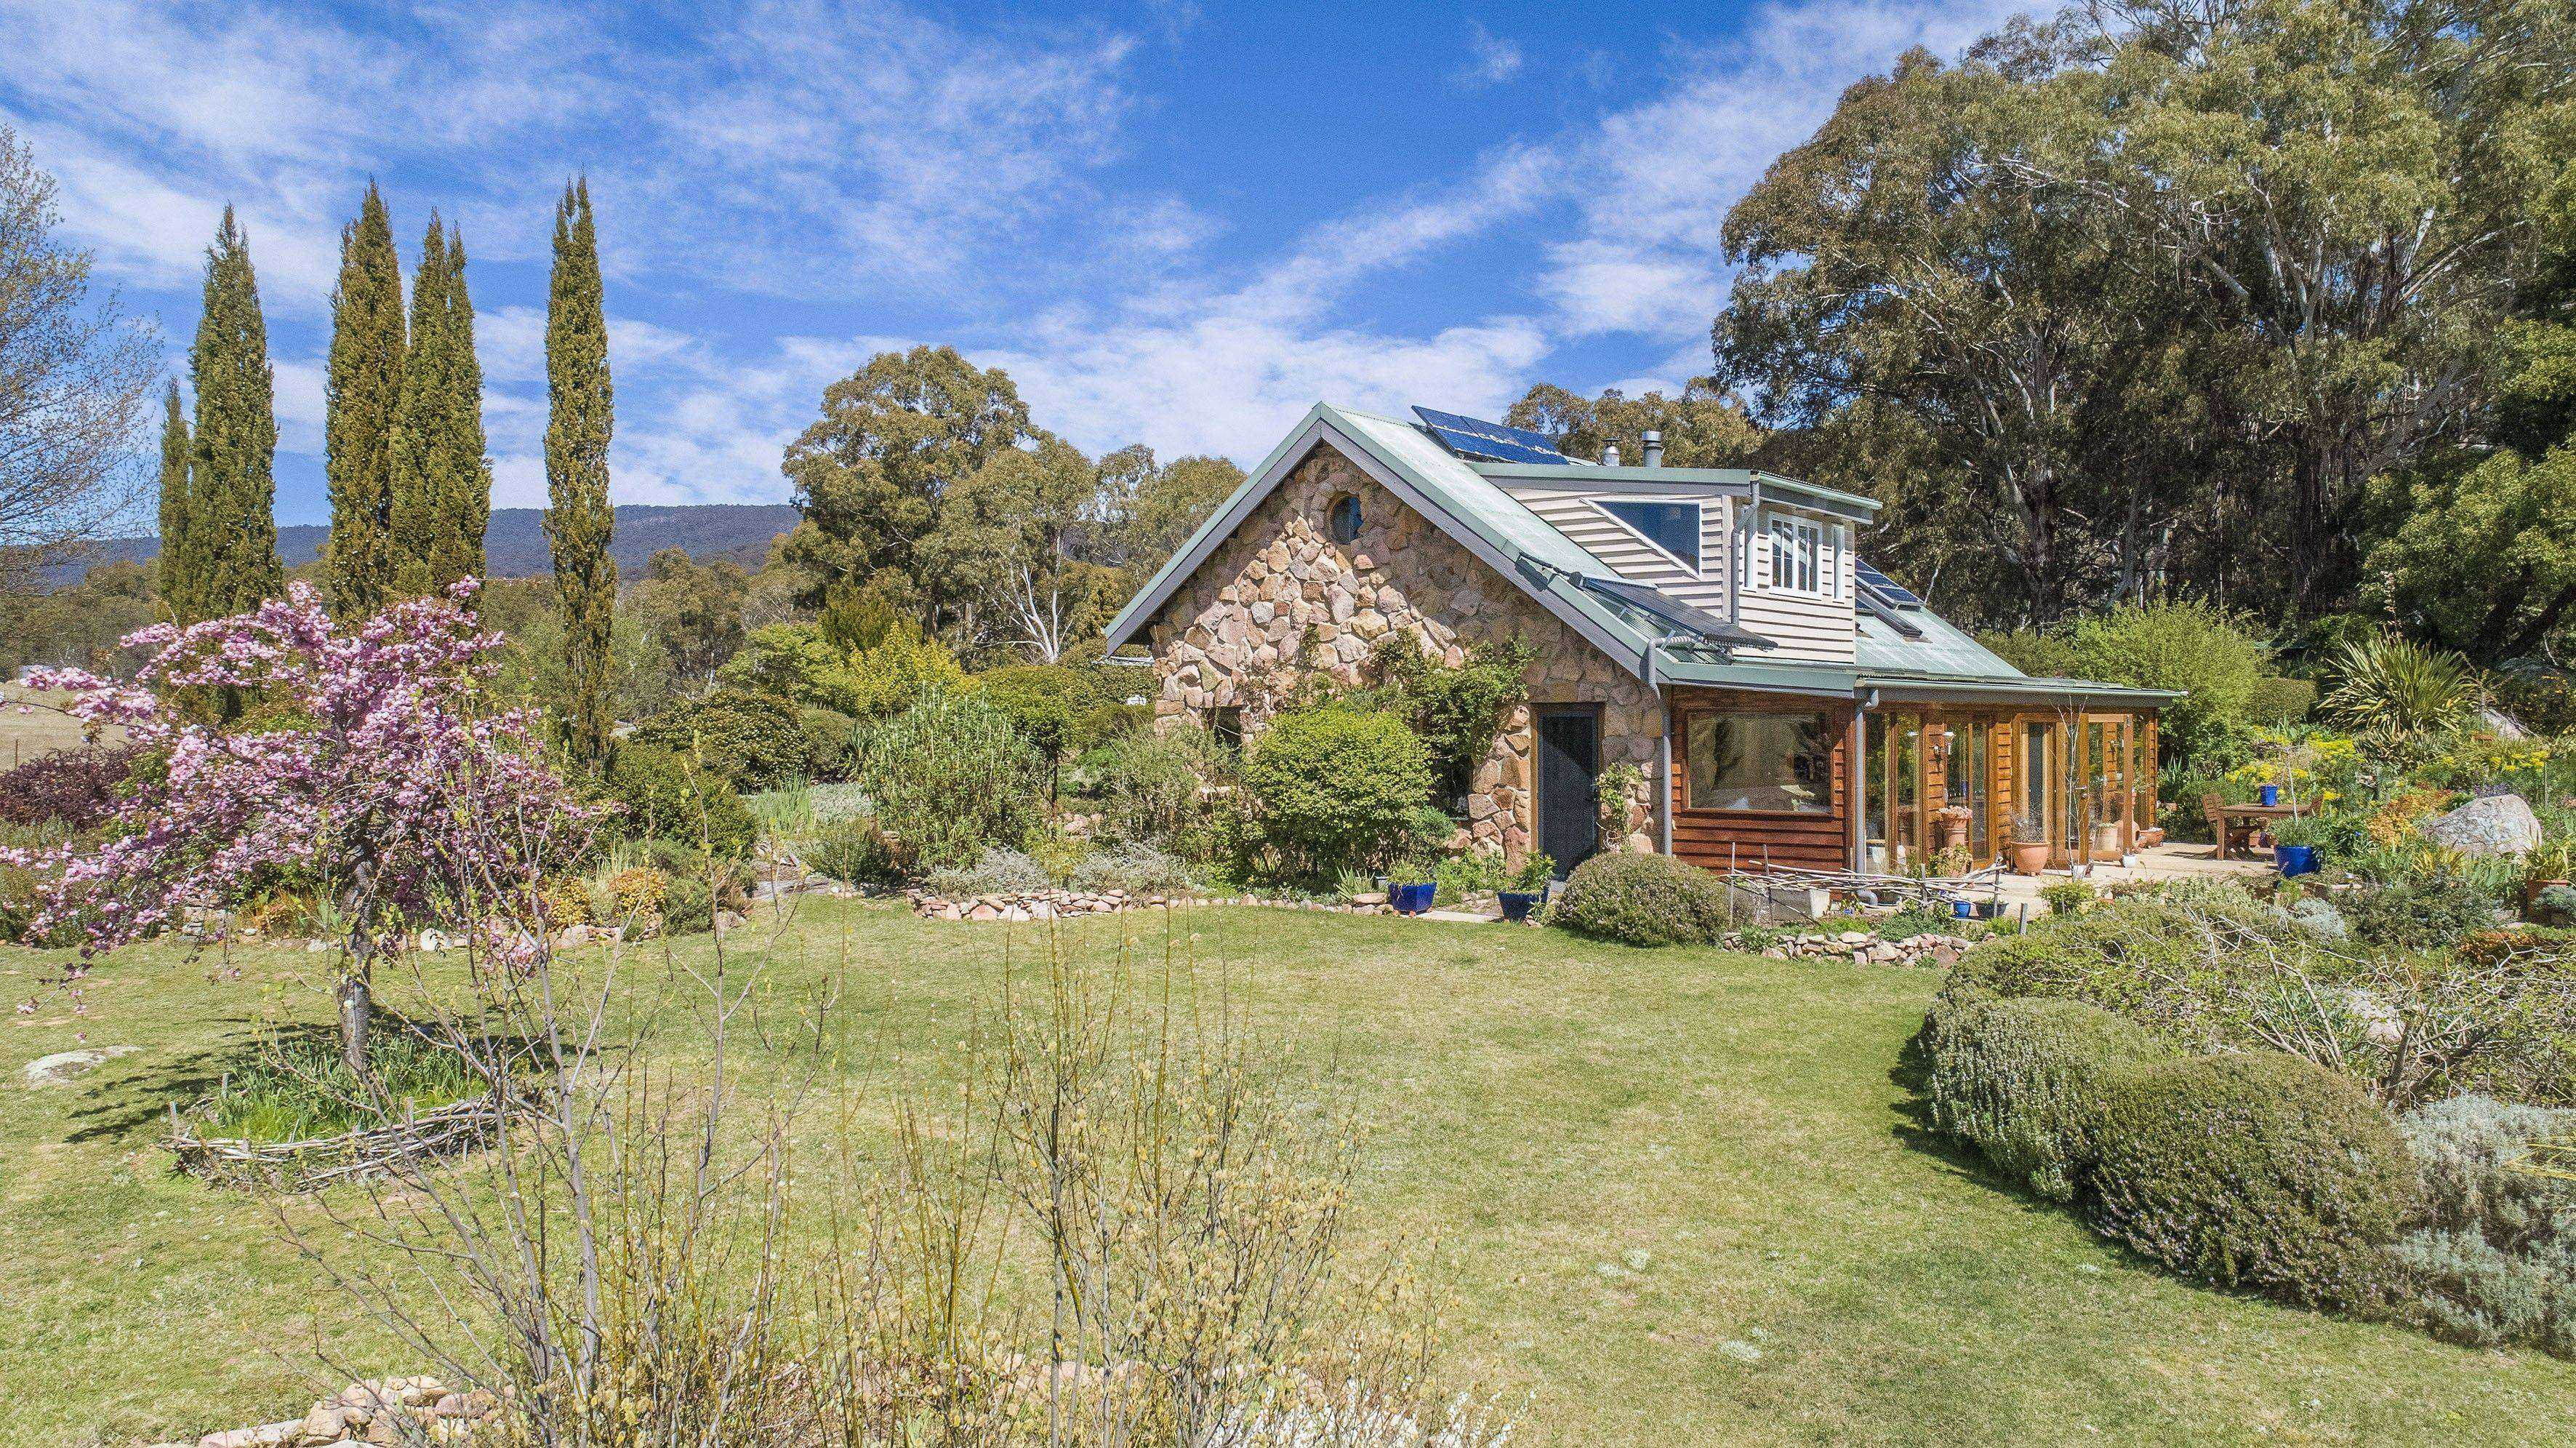 Write your own story in a fairytale cottage on 100 acres near Braidwood